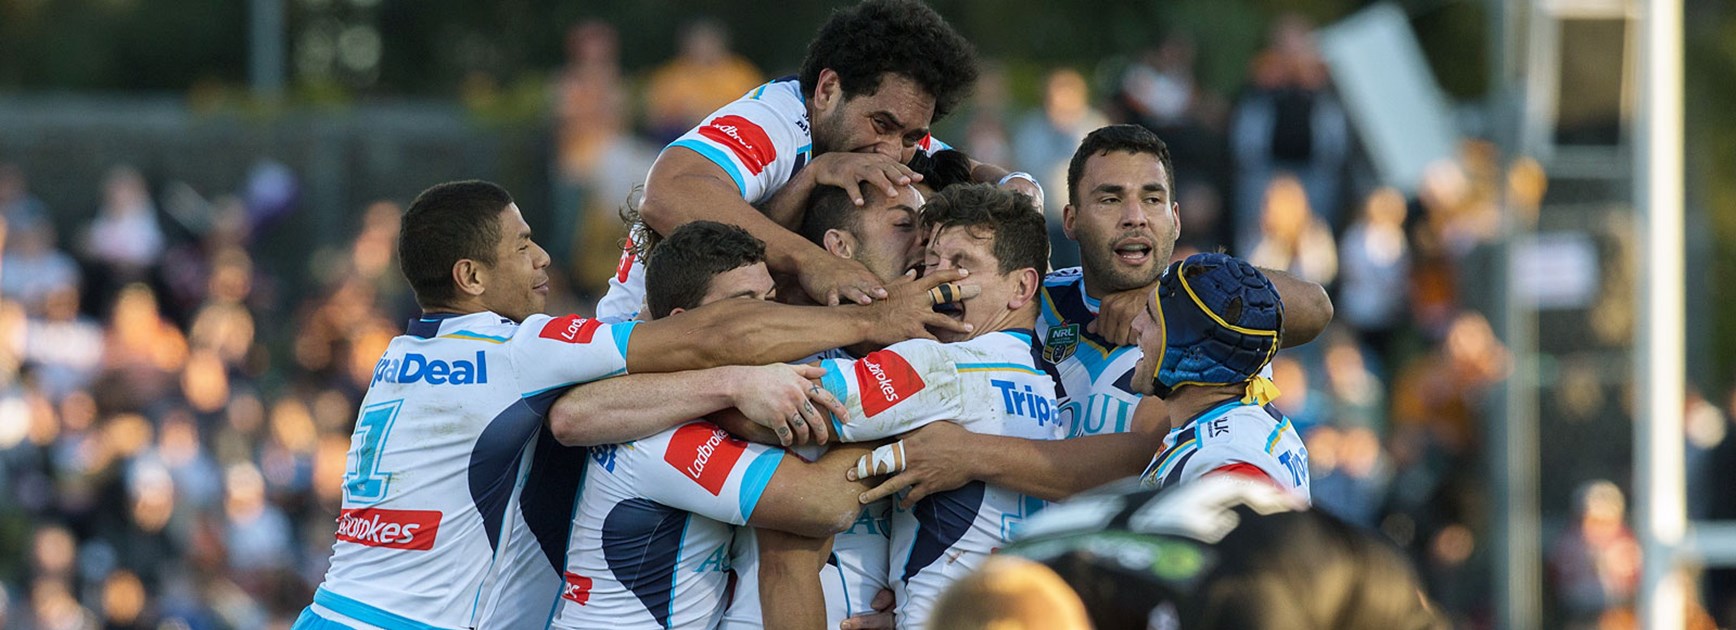 Titans players celebrate their one point win over Wests Tigers.